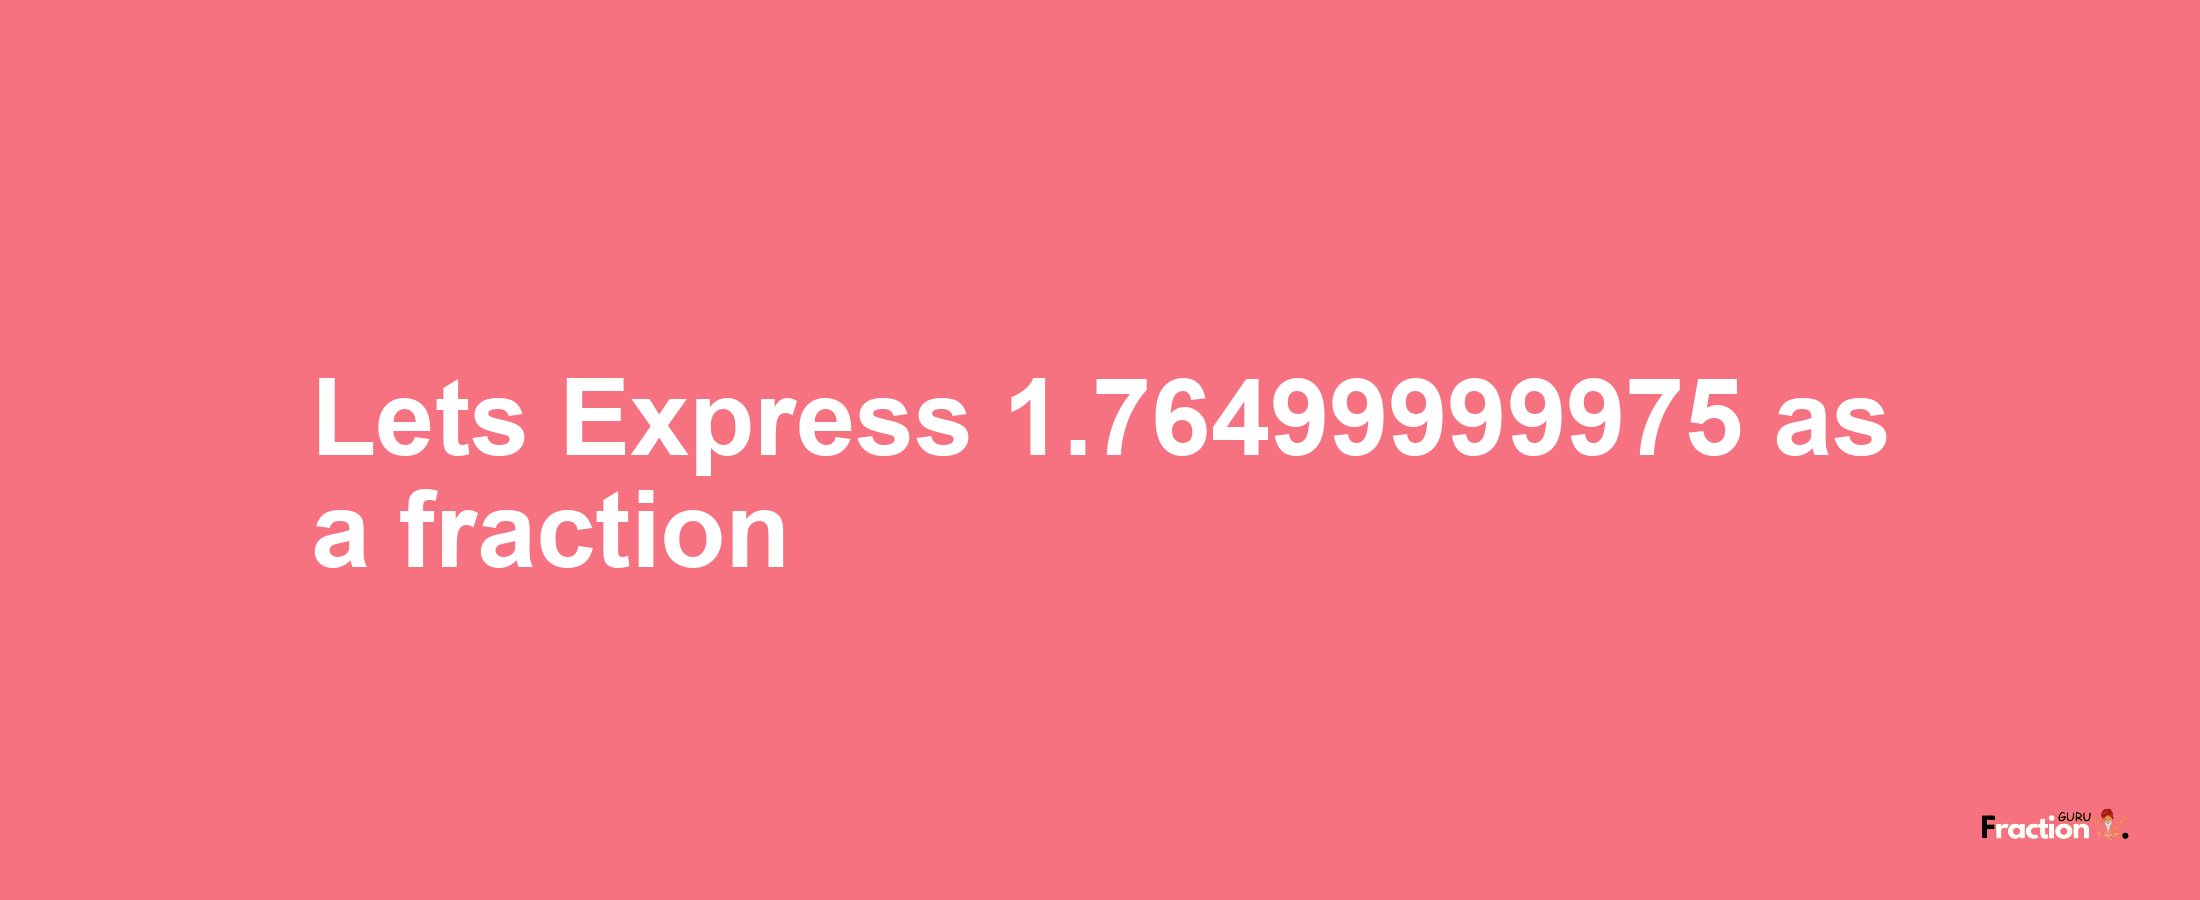 Lets Express 1.76499999975 as afraction